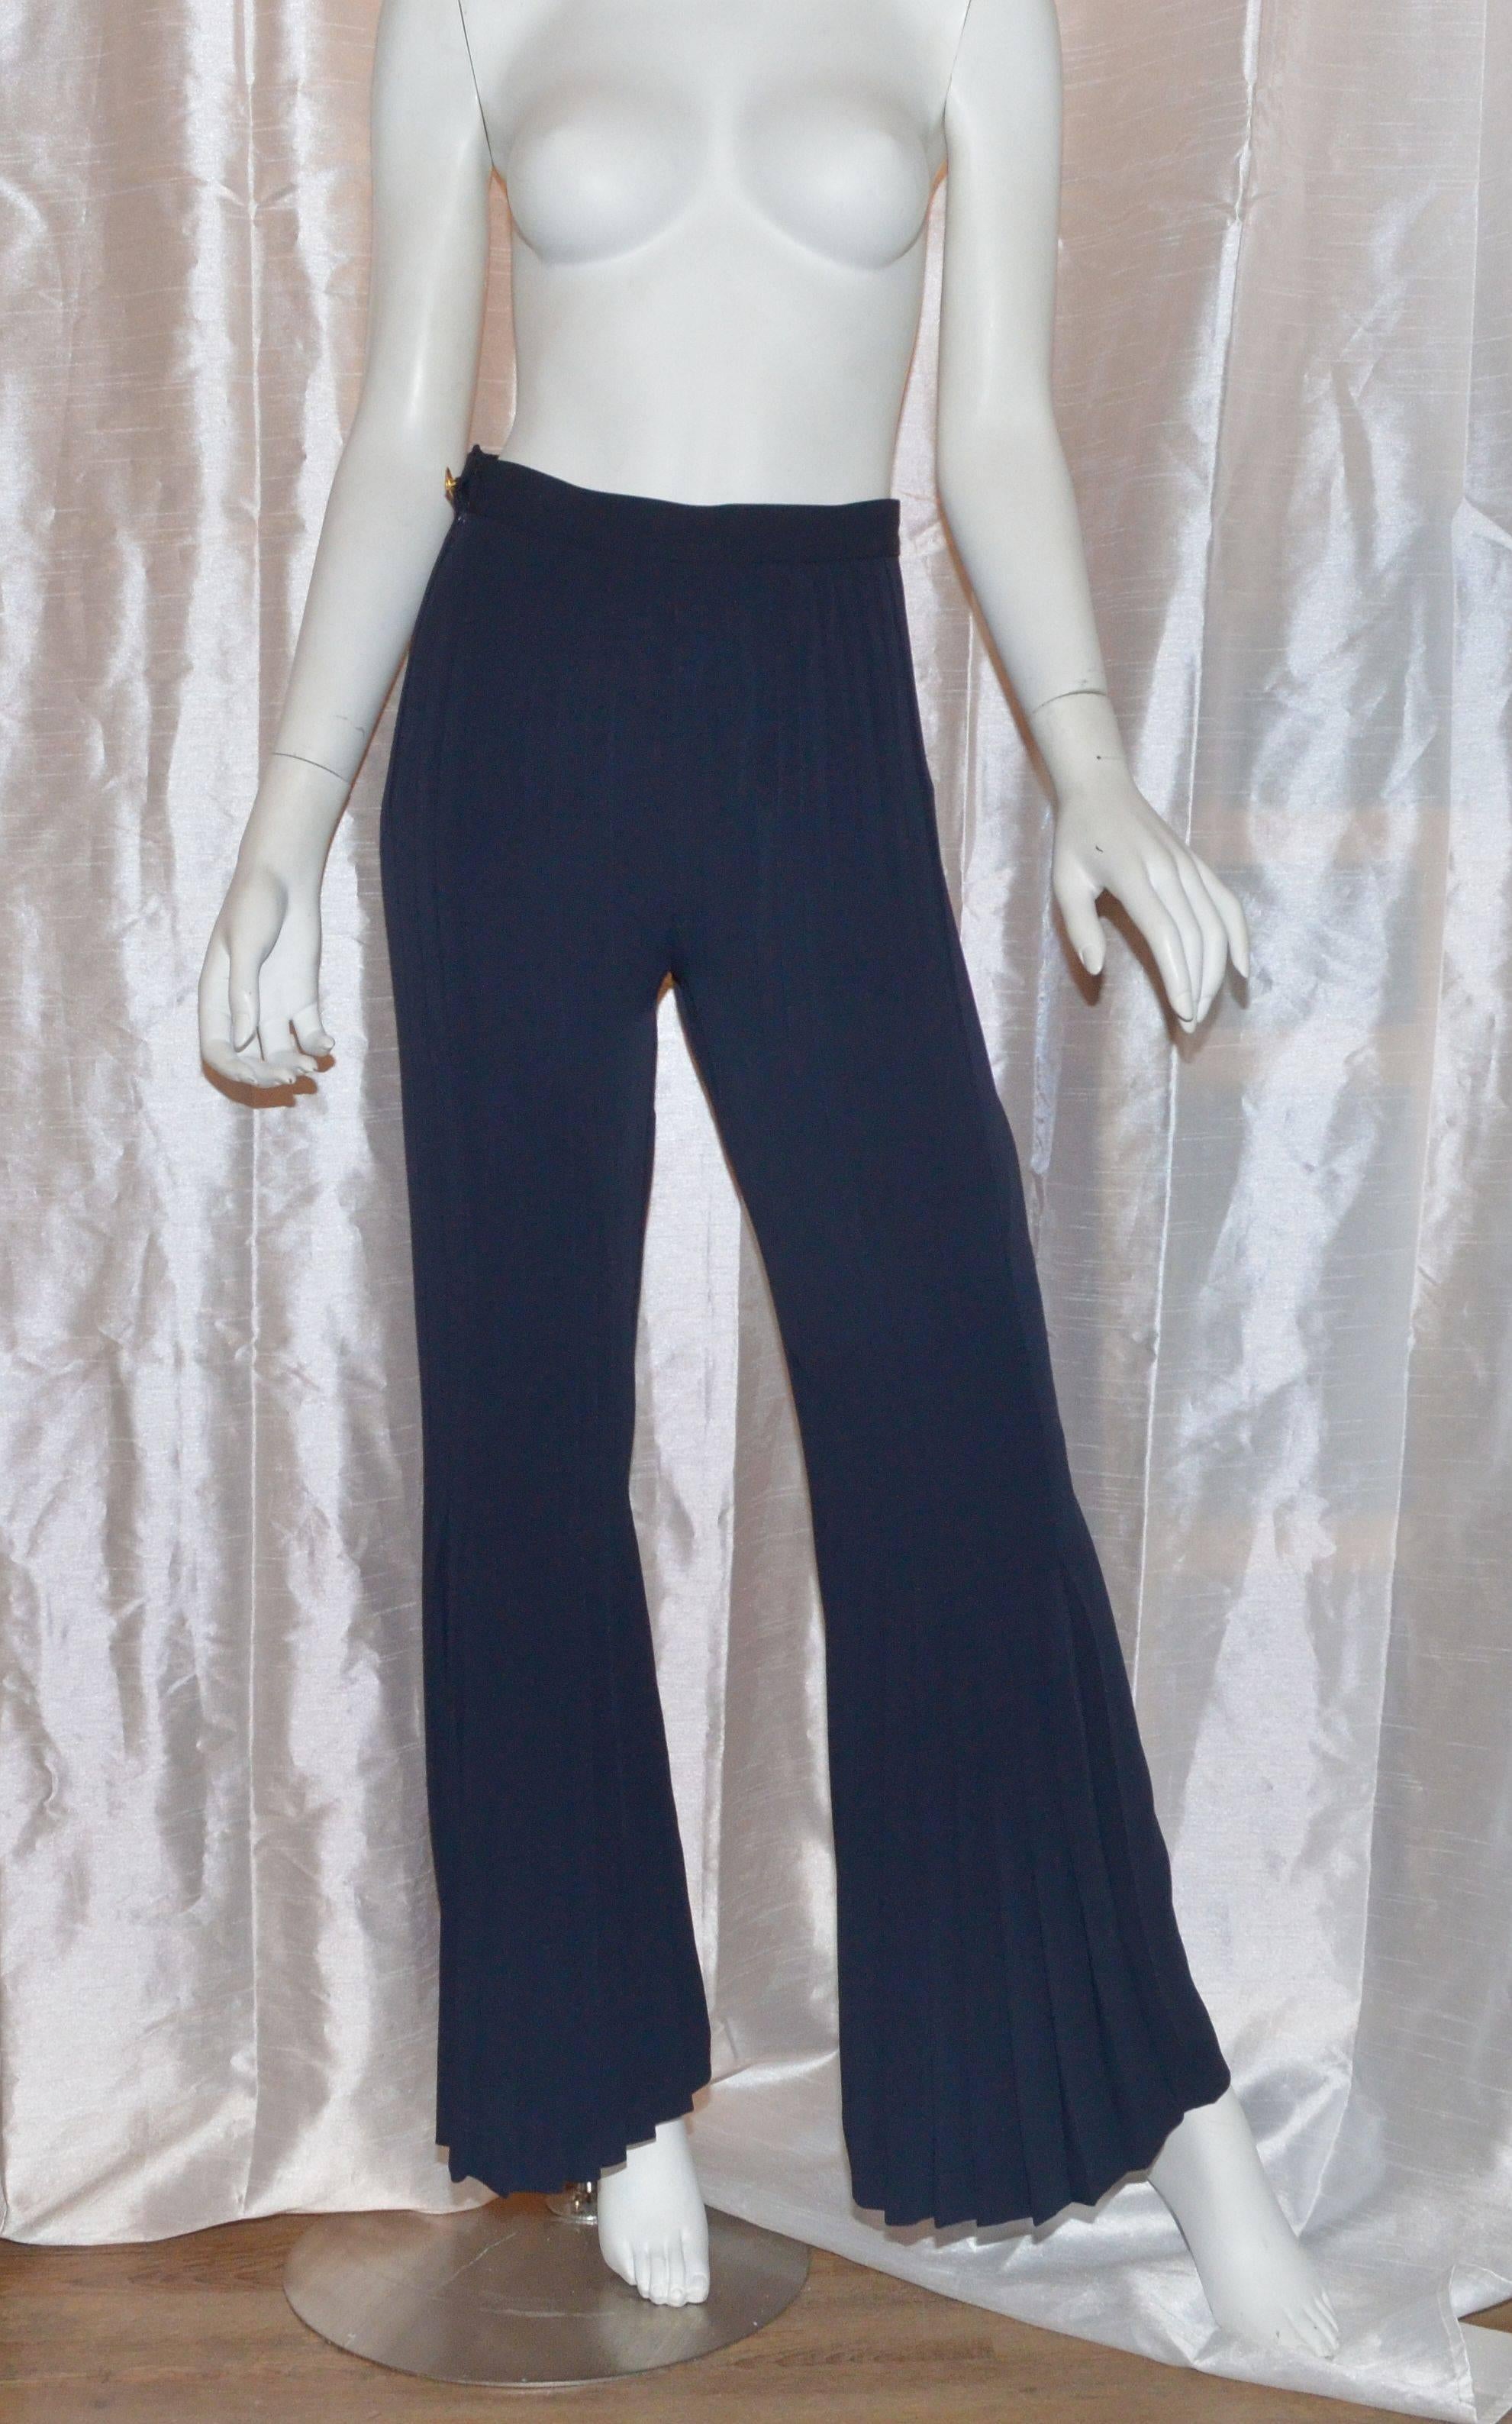 Chanel Vintage Navy Blue Pin tucked and Pleated Leg Trouser Pants

Beautiful Chanel pants feature a pleated detailing along the front legs with a side zipper and gold-tone button fastening. Ends of the pants have a sheer lining.